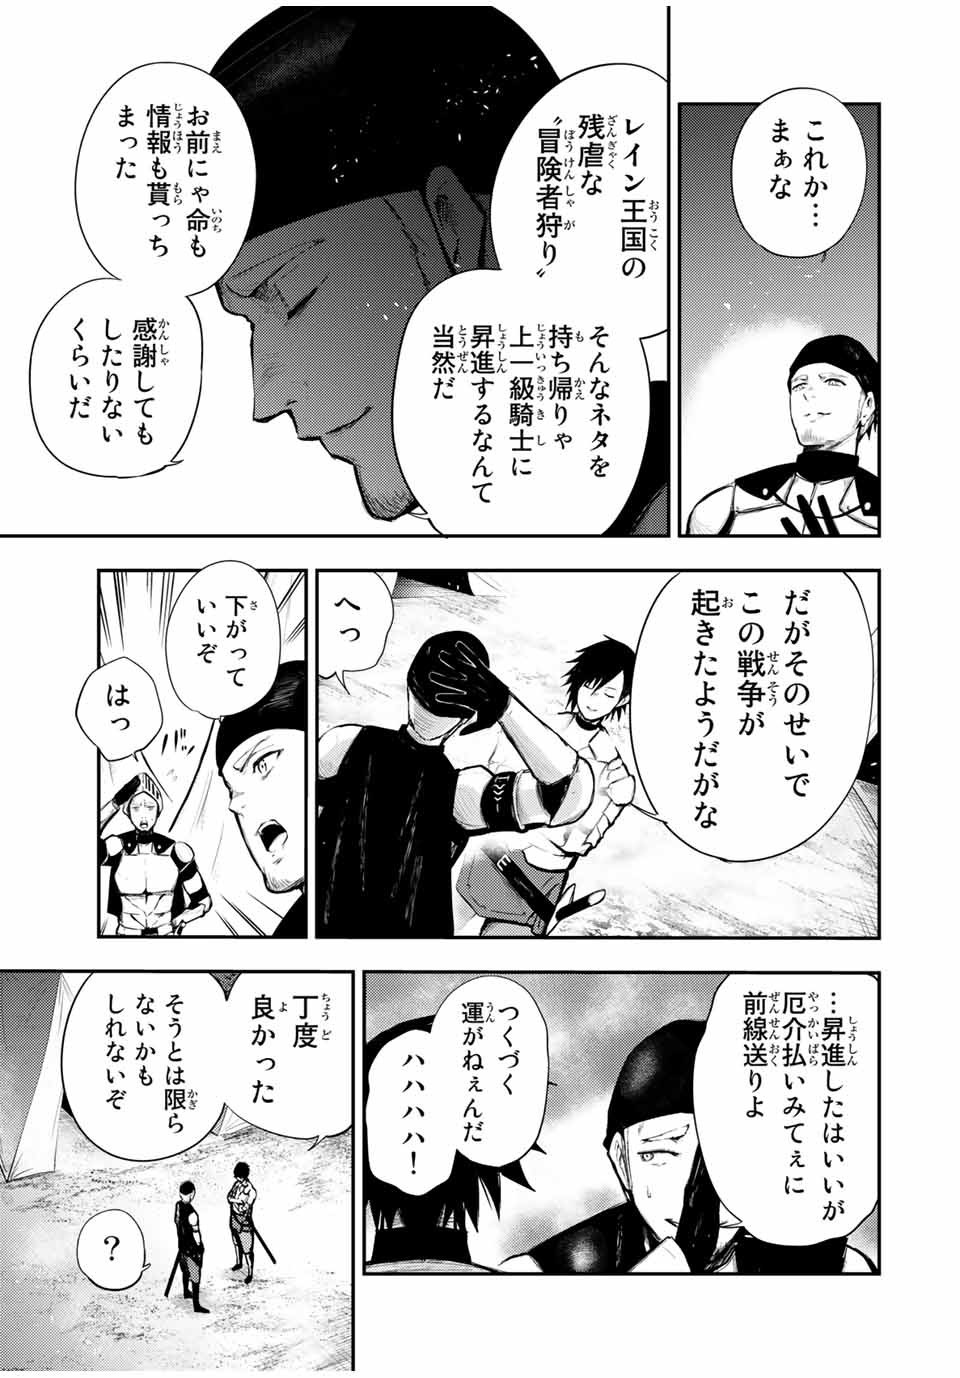 the strongest former prince-; 奴隷転生 ～その奴隷、最強の元王子につき～ 第27話 - Page 13